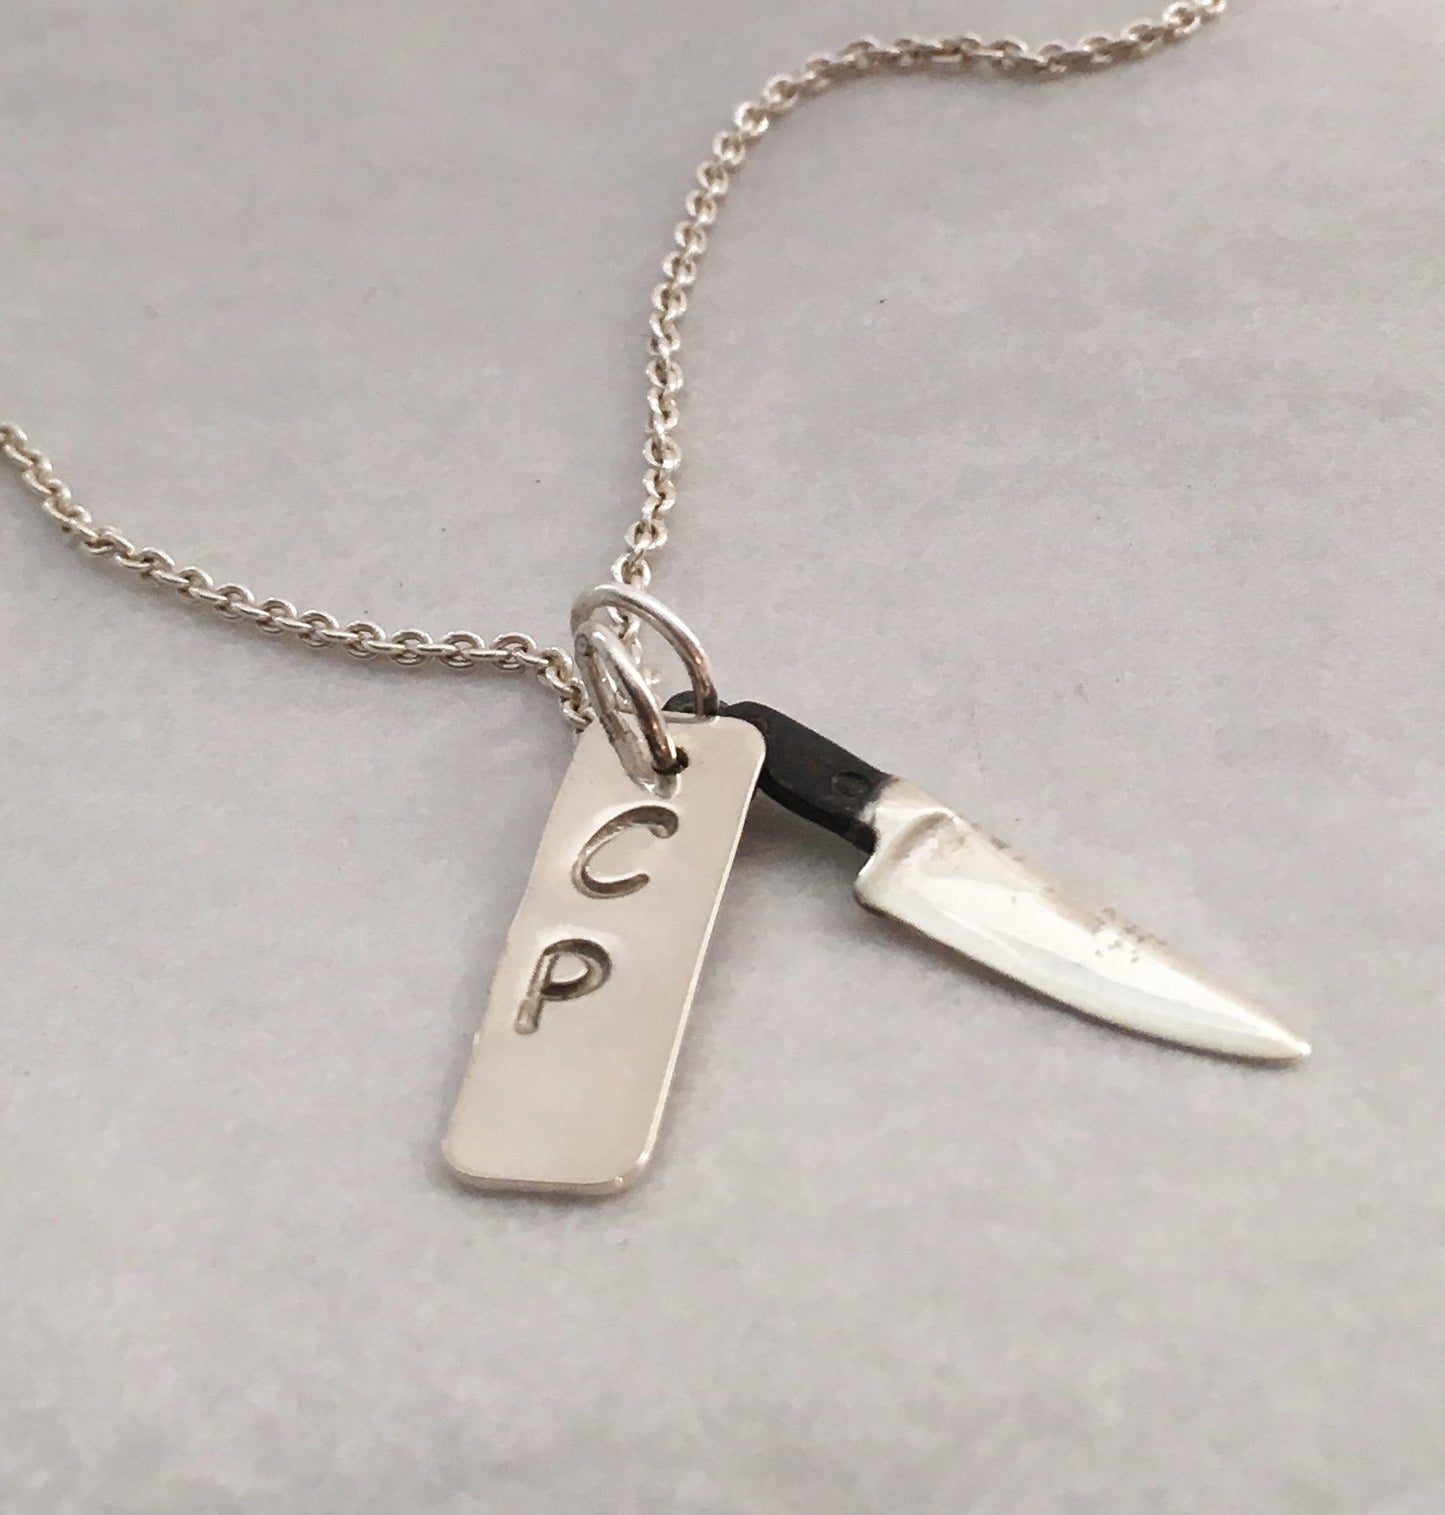 Personalized Chef Knife Pendant Necklace with Initials